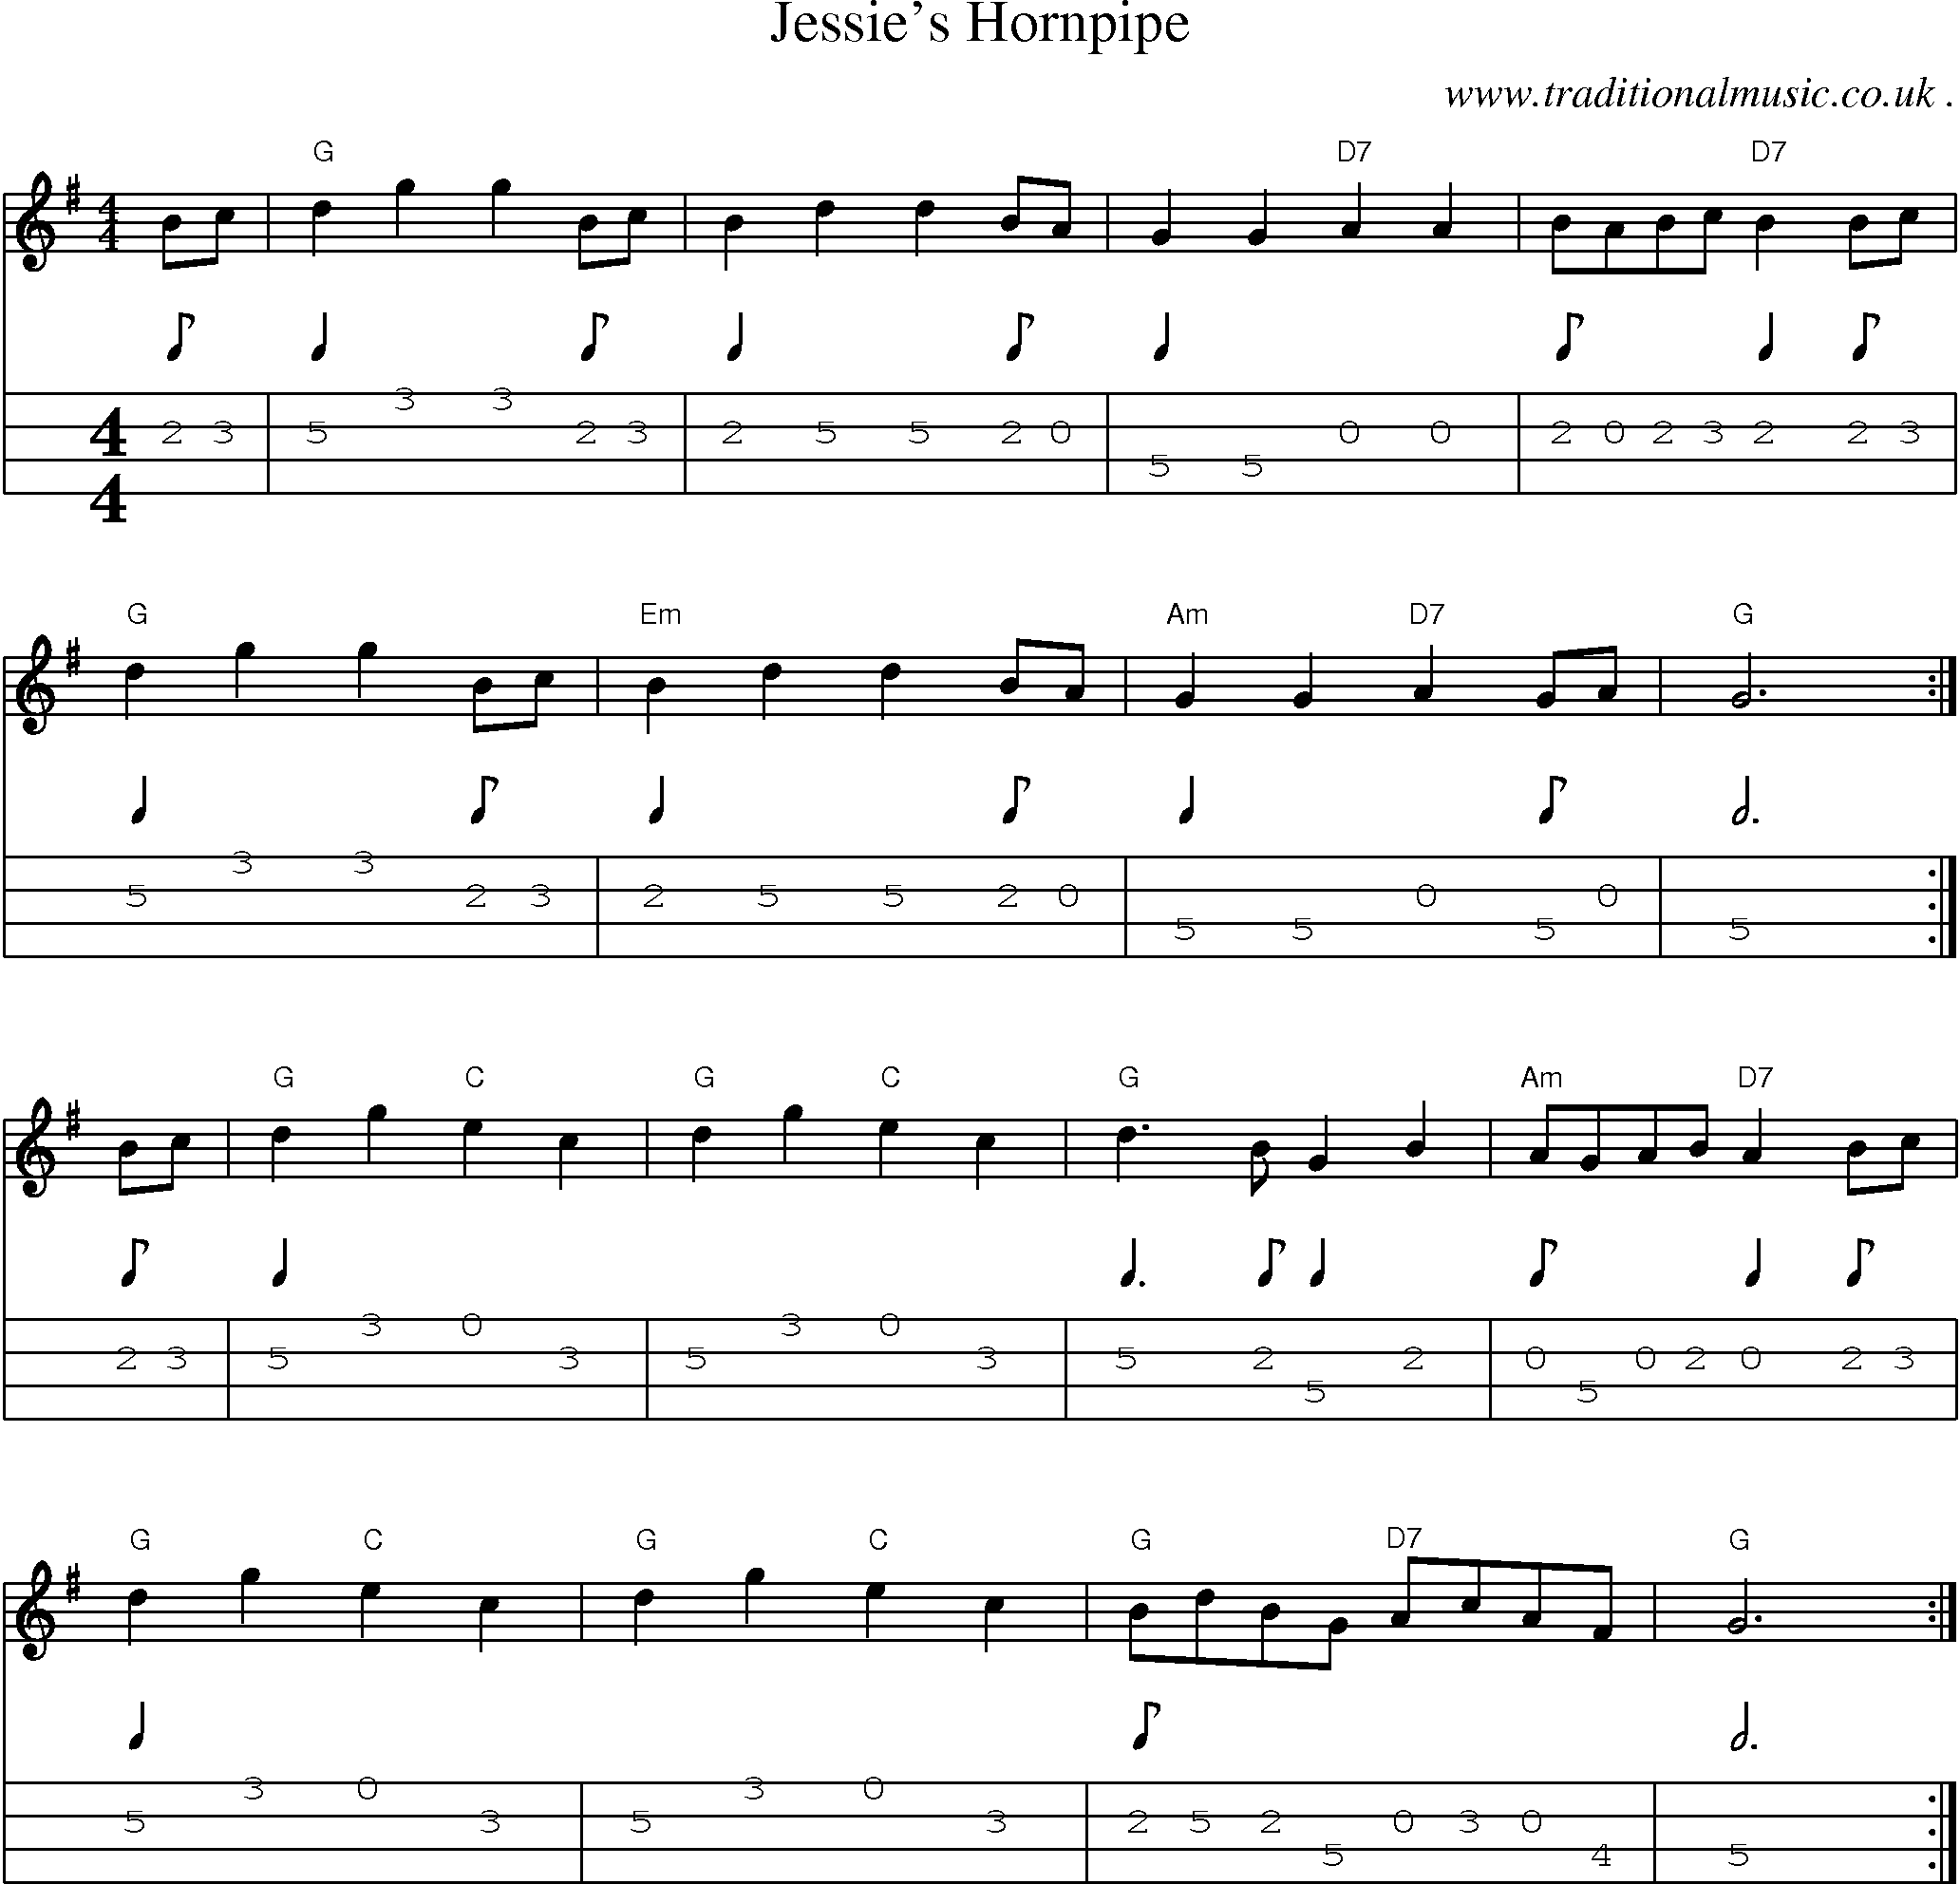 Music Score and Guitar Tabs for Jessies Hornpipe